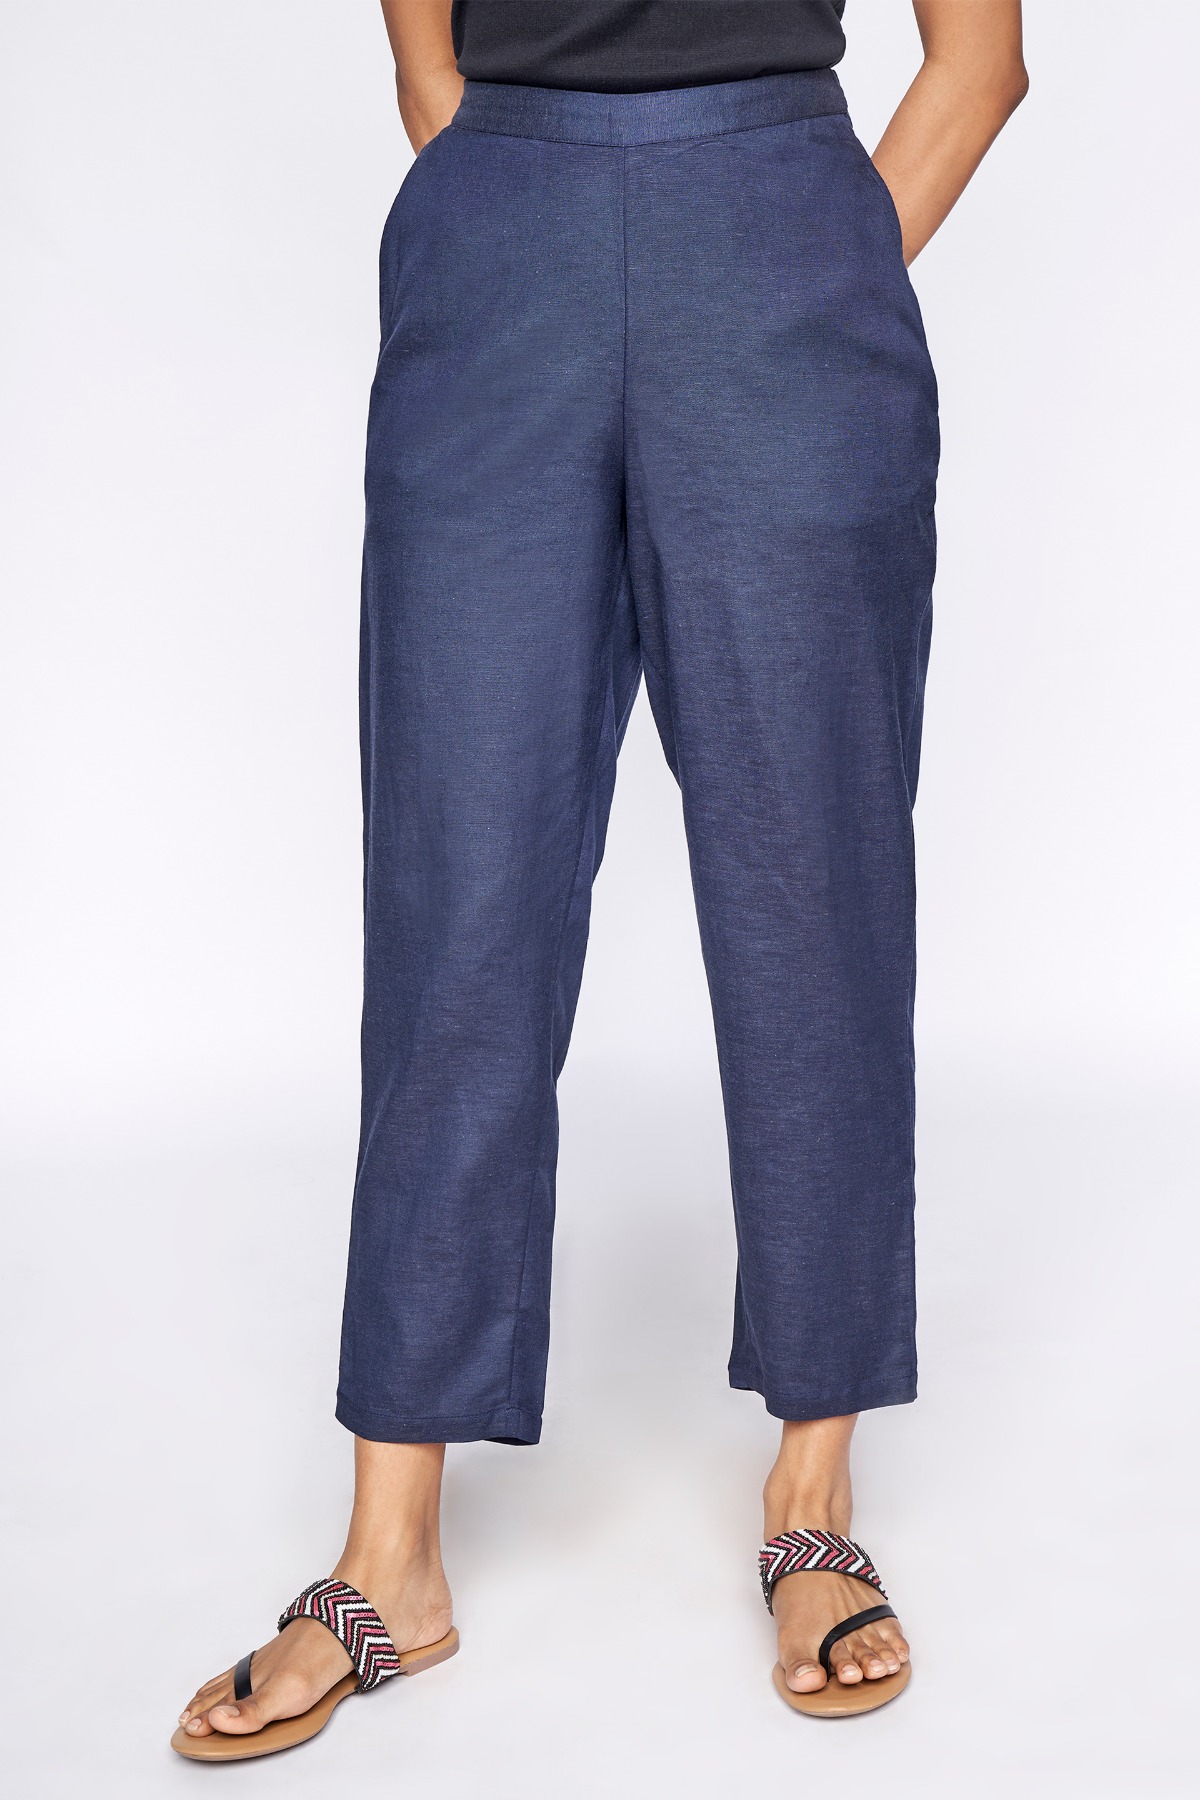 1 - Navy Blue Solid Tapered Bottom, image 1